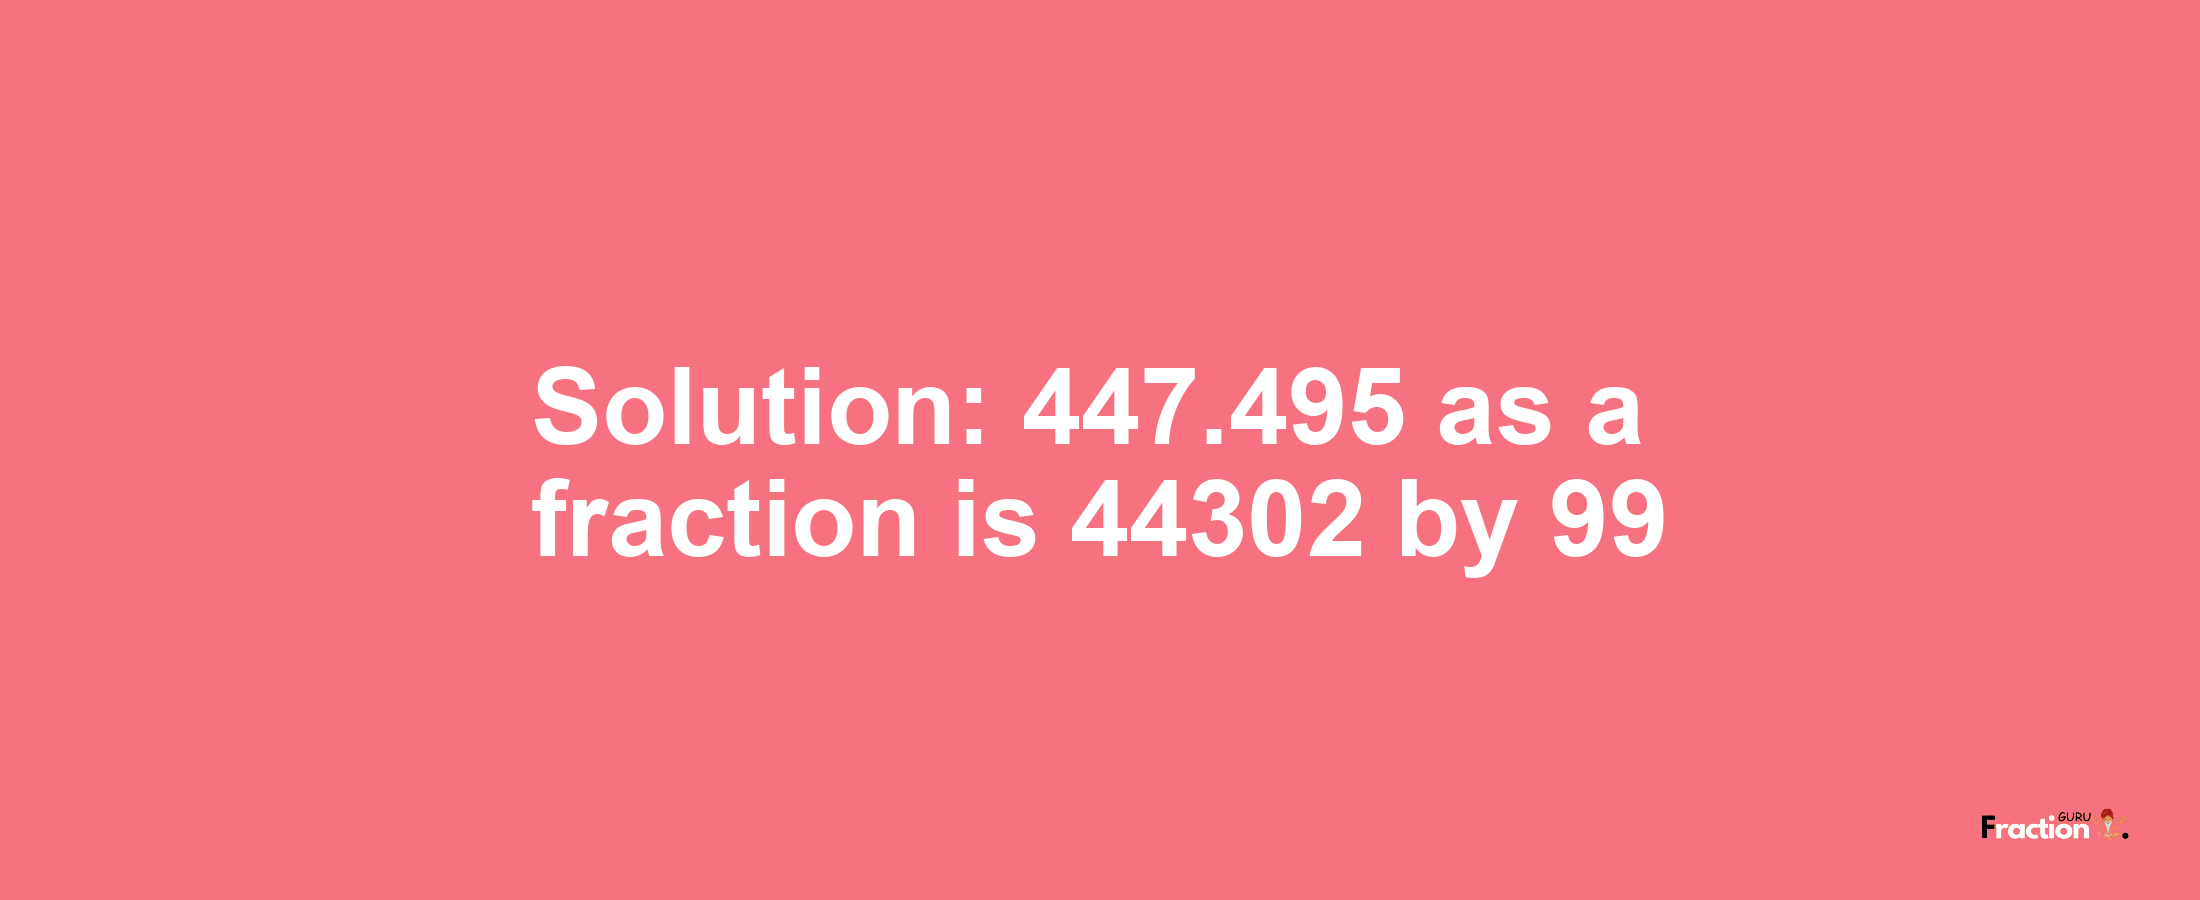 Solution:447.495 as a fraction is 44302/99